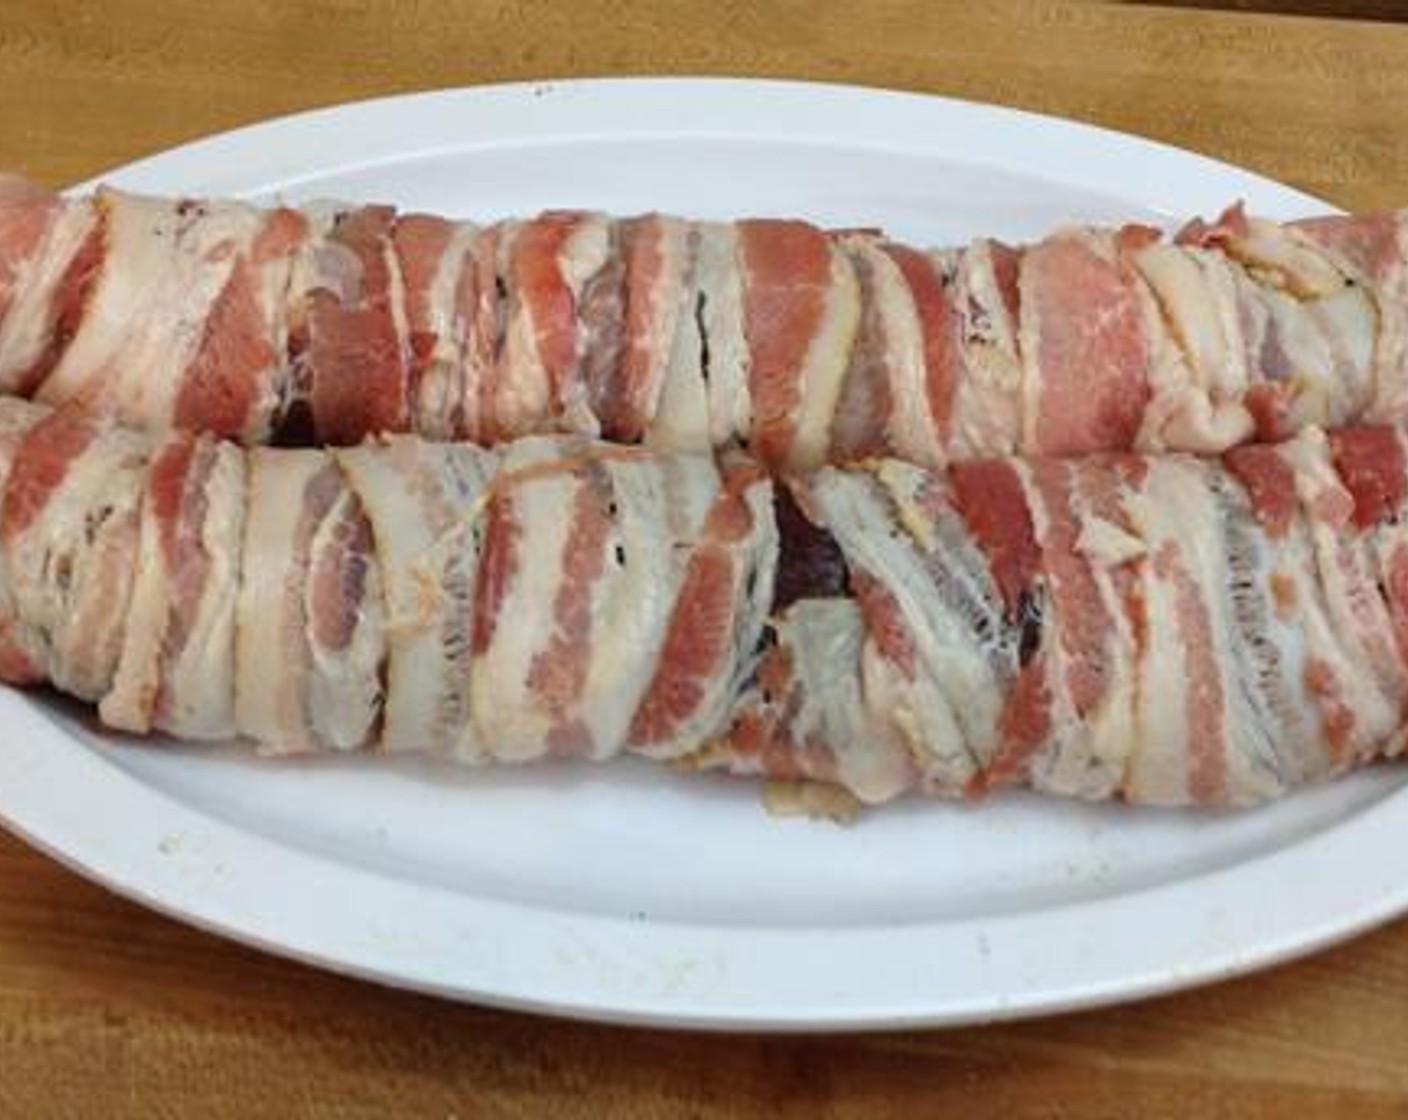 step 2 Start at one end of the strap and roll the bacon around overlapping each pass. Continue doing this down the length of the venison backstrap.